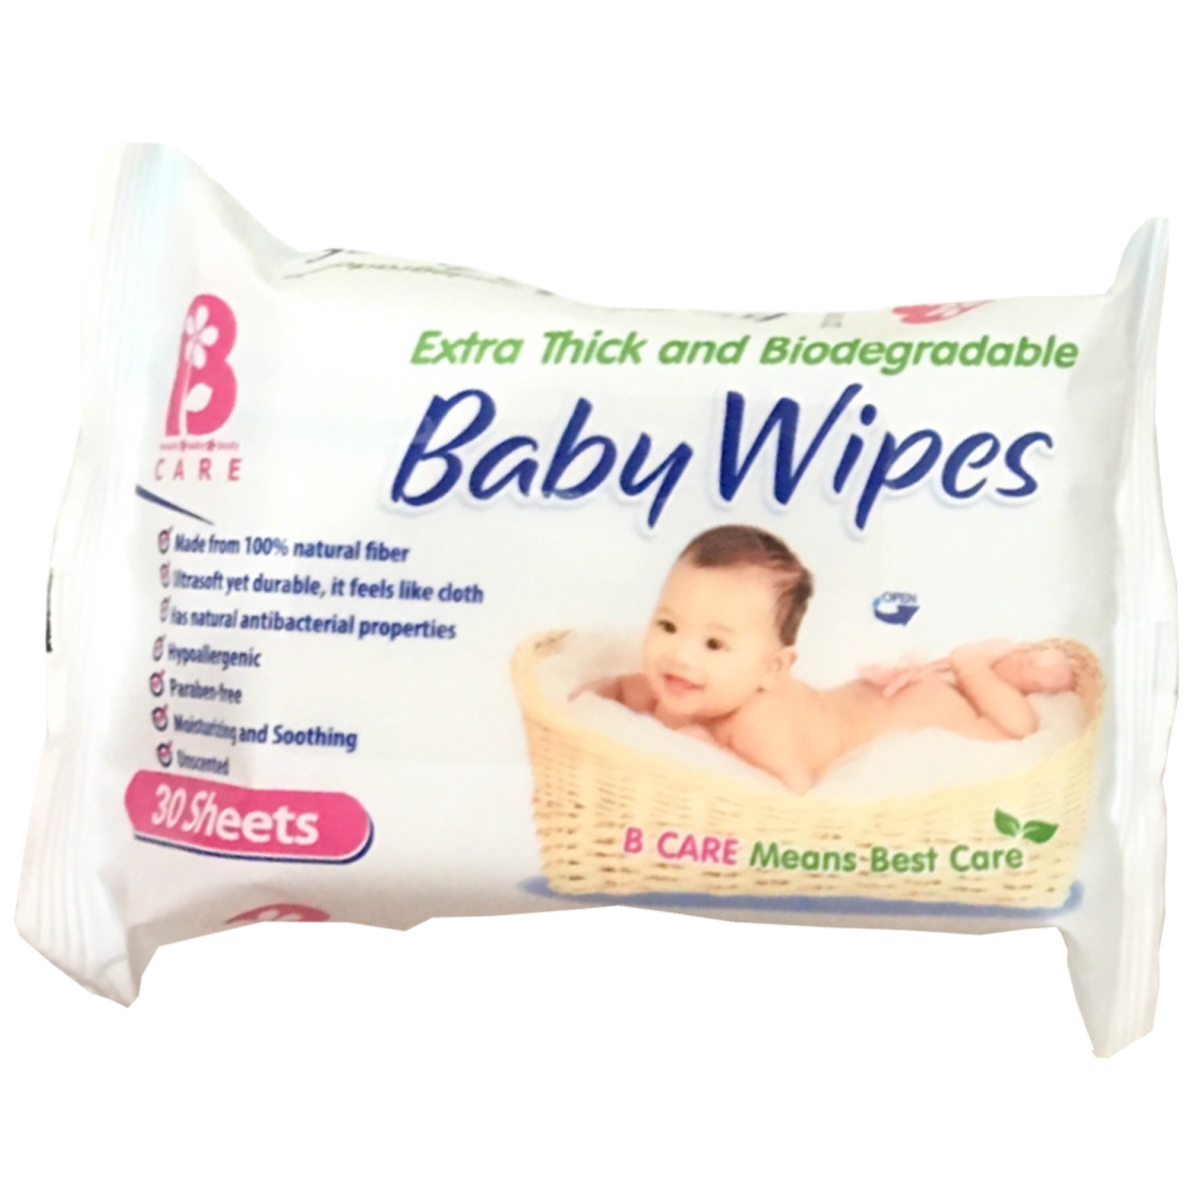 B Care Paraben Free Biodegradable Baby Wipes 30 Sheets